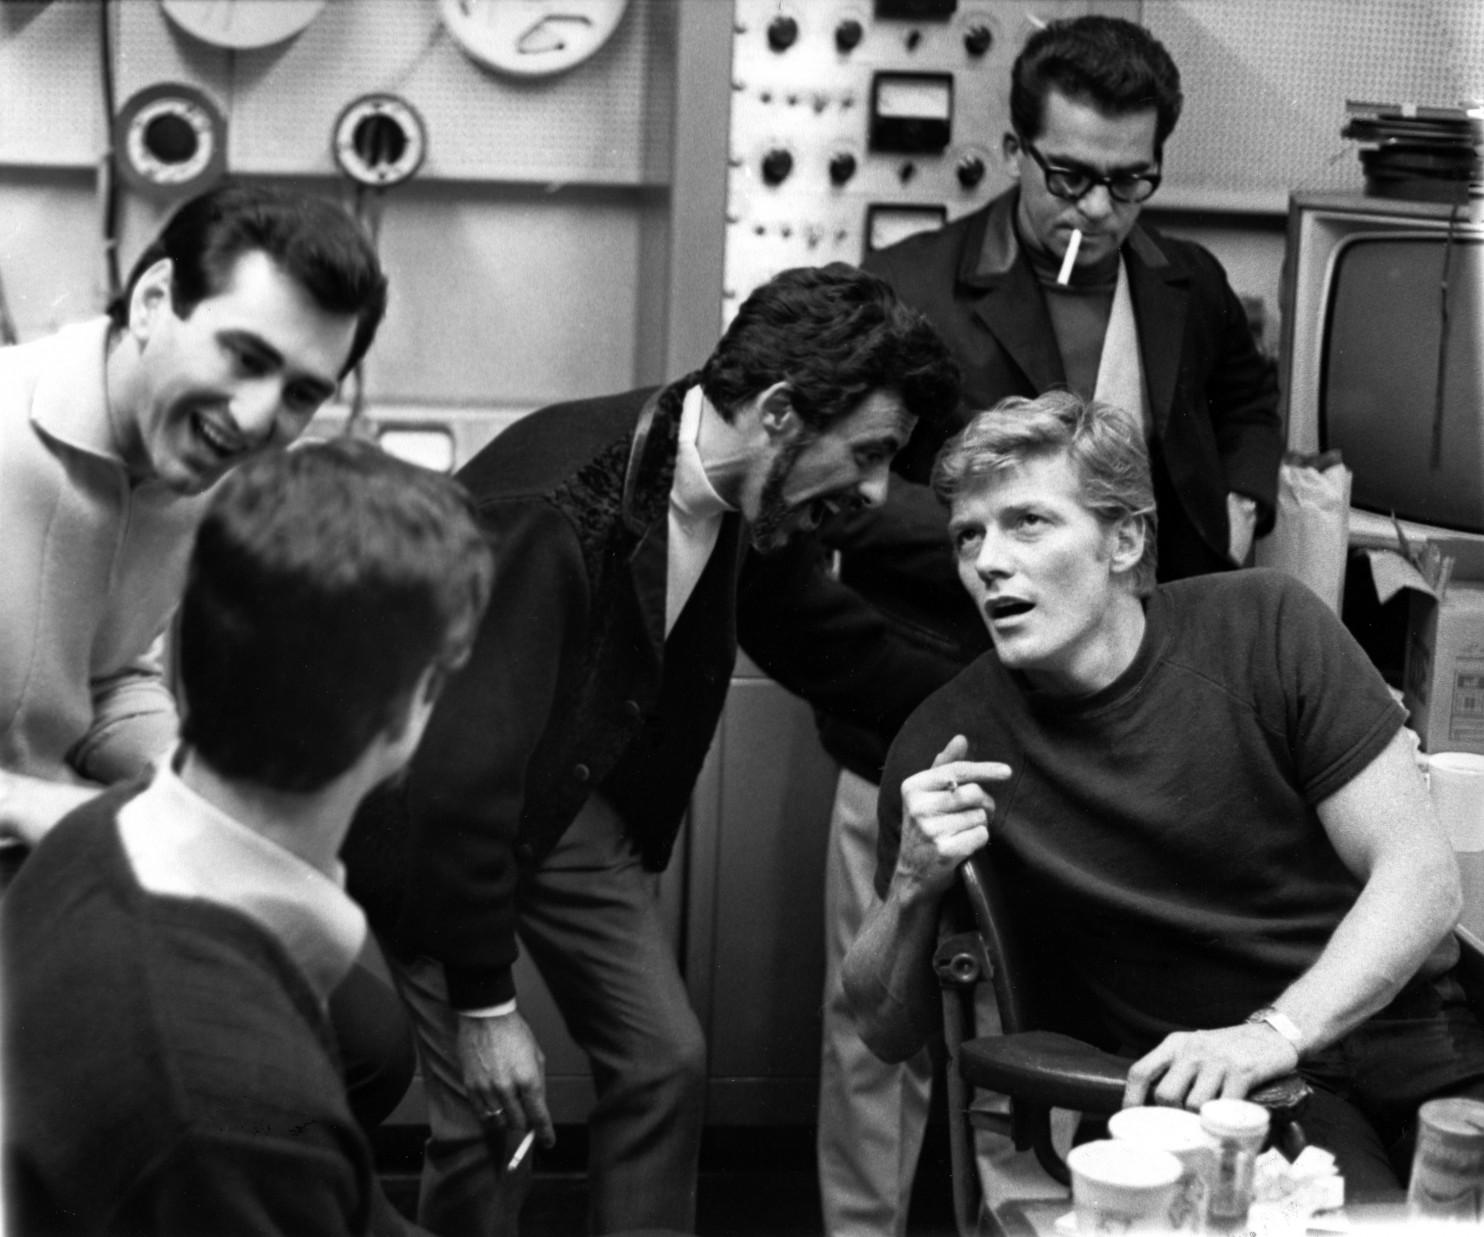 Bob Crewe was Major 50s, 60s Music Force for Frankie Valli, others